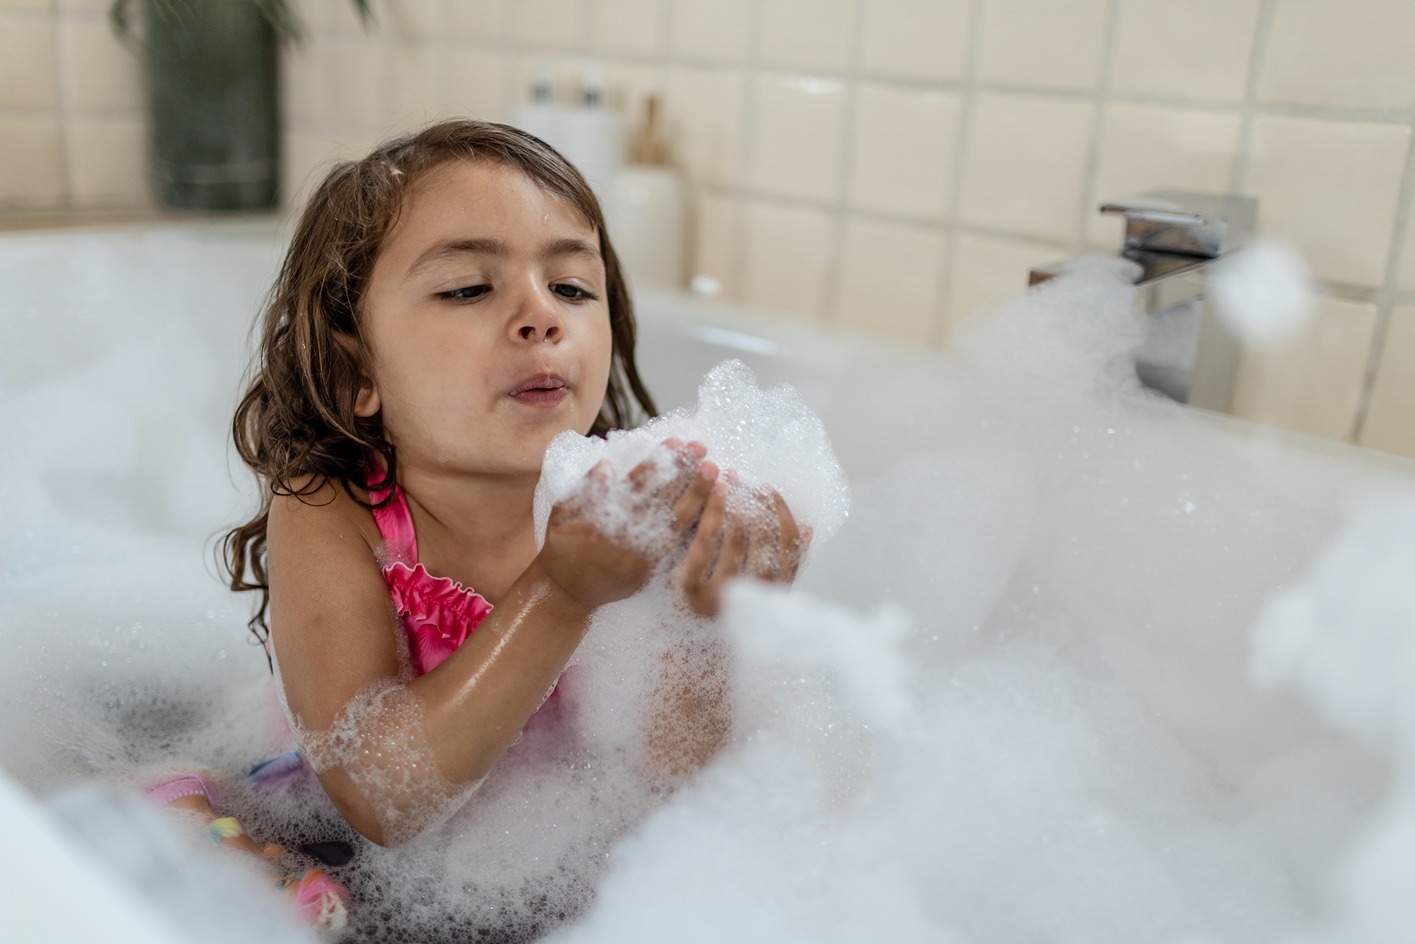 Little girl blowing bubbles in a bath tub, heated by Calor LPG